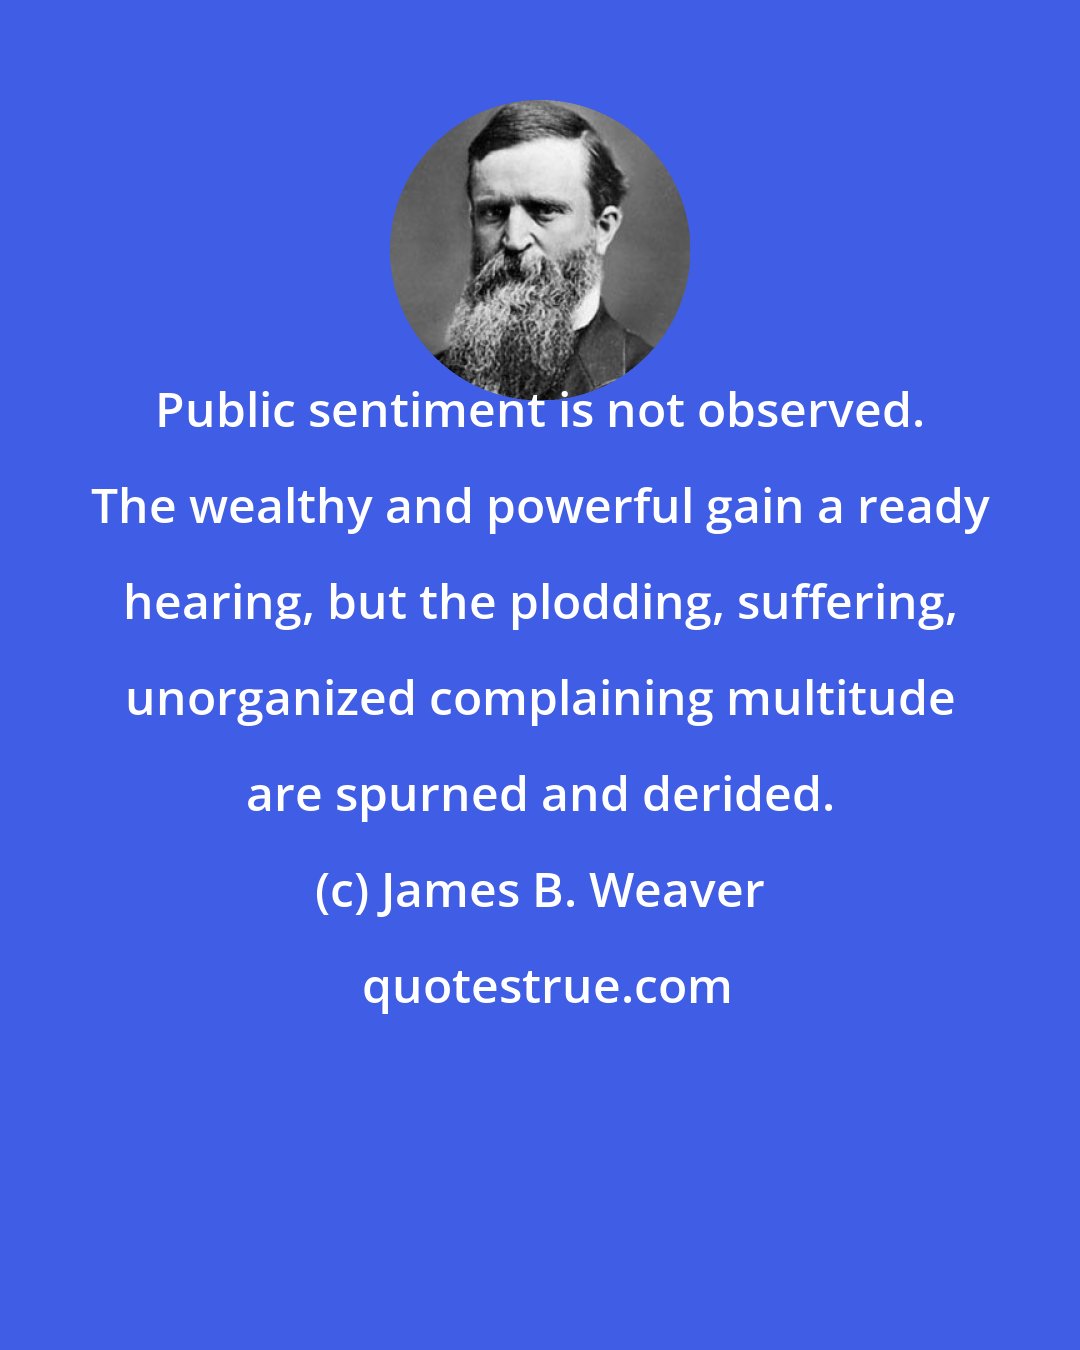 James B. Weaver: Public sentiment is not observed. The wealthy and powerful gain a ready hearing, but the plodding, suffering, unorganized complaining multitude are spurned and derided.